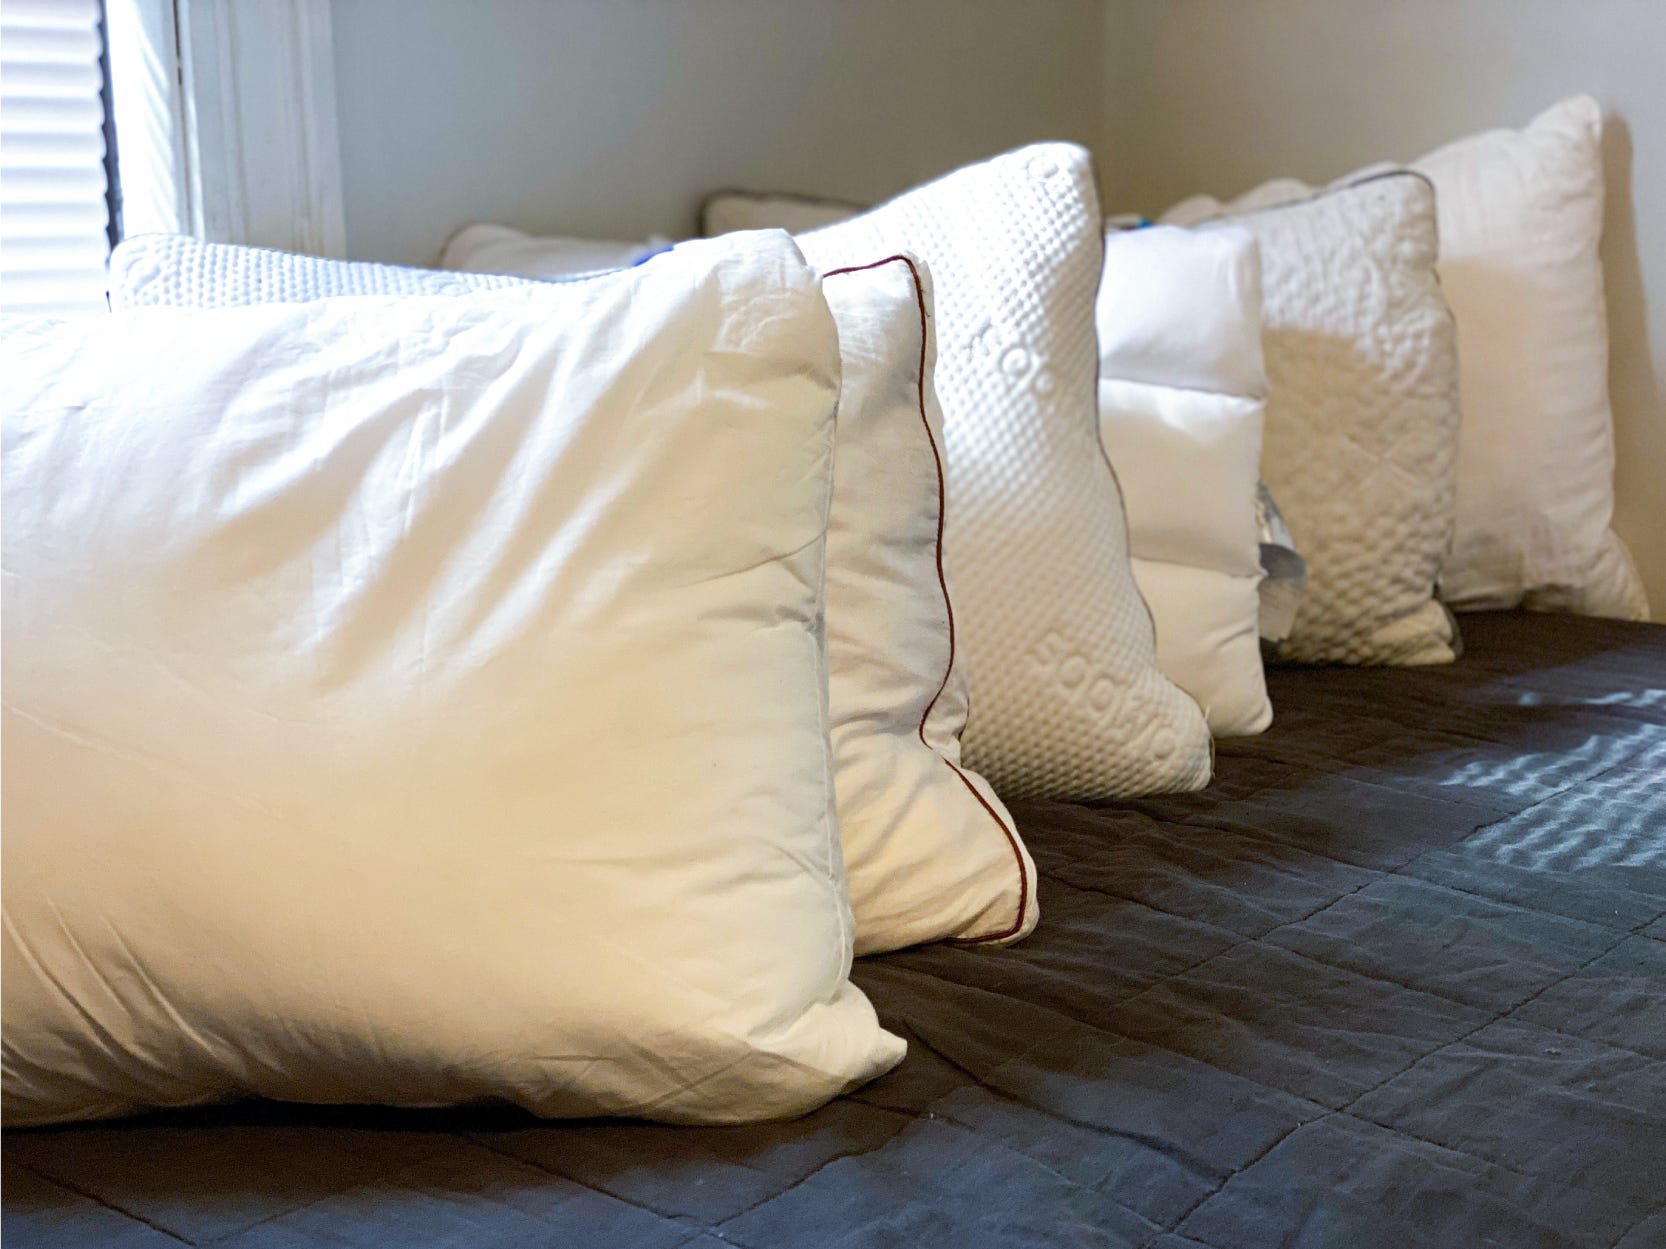 best pillows 4x3 featuring four pillows lined up neatly on a bed